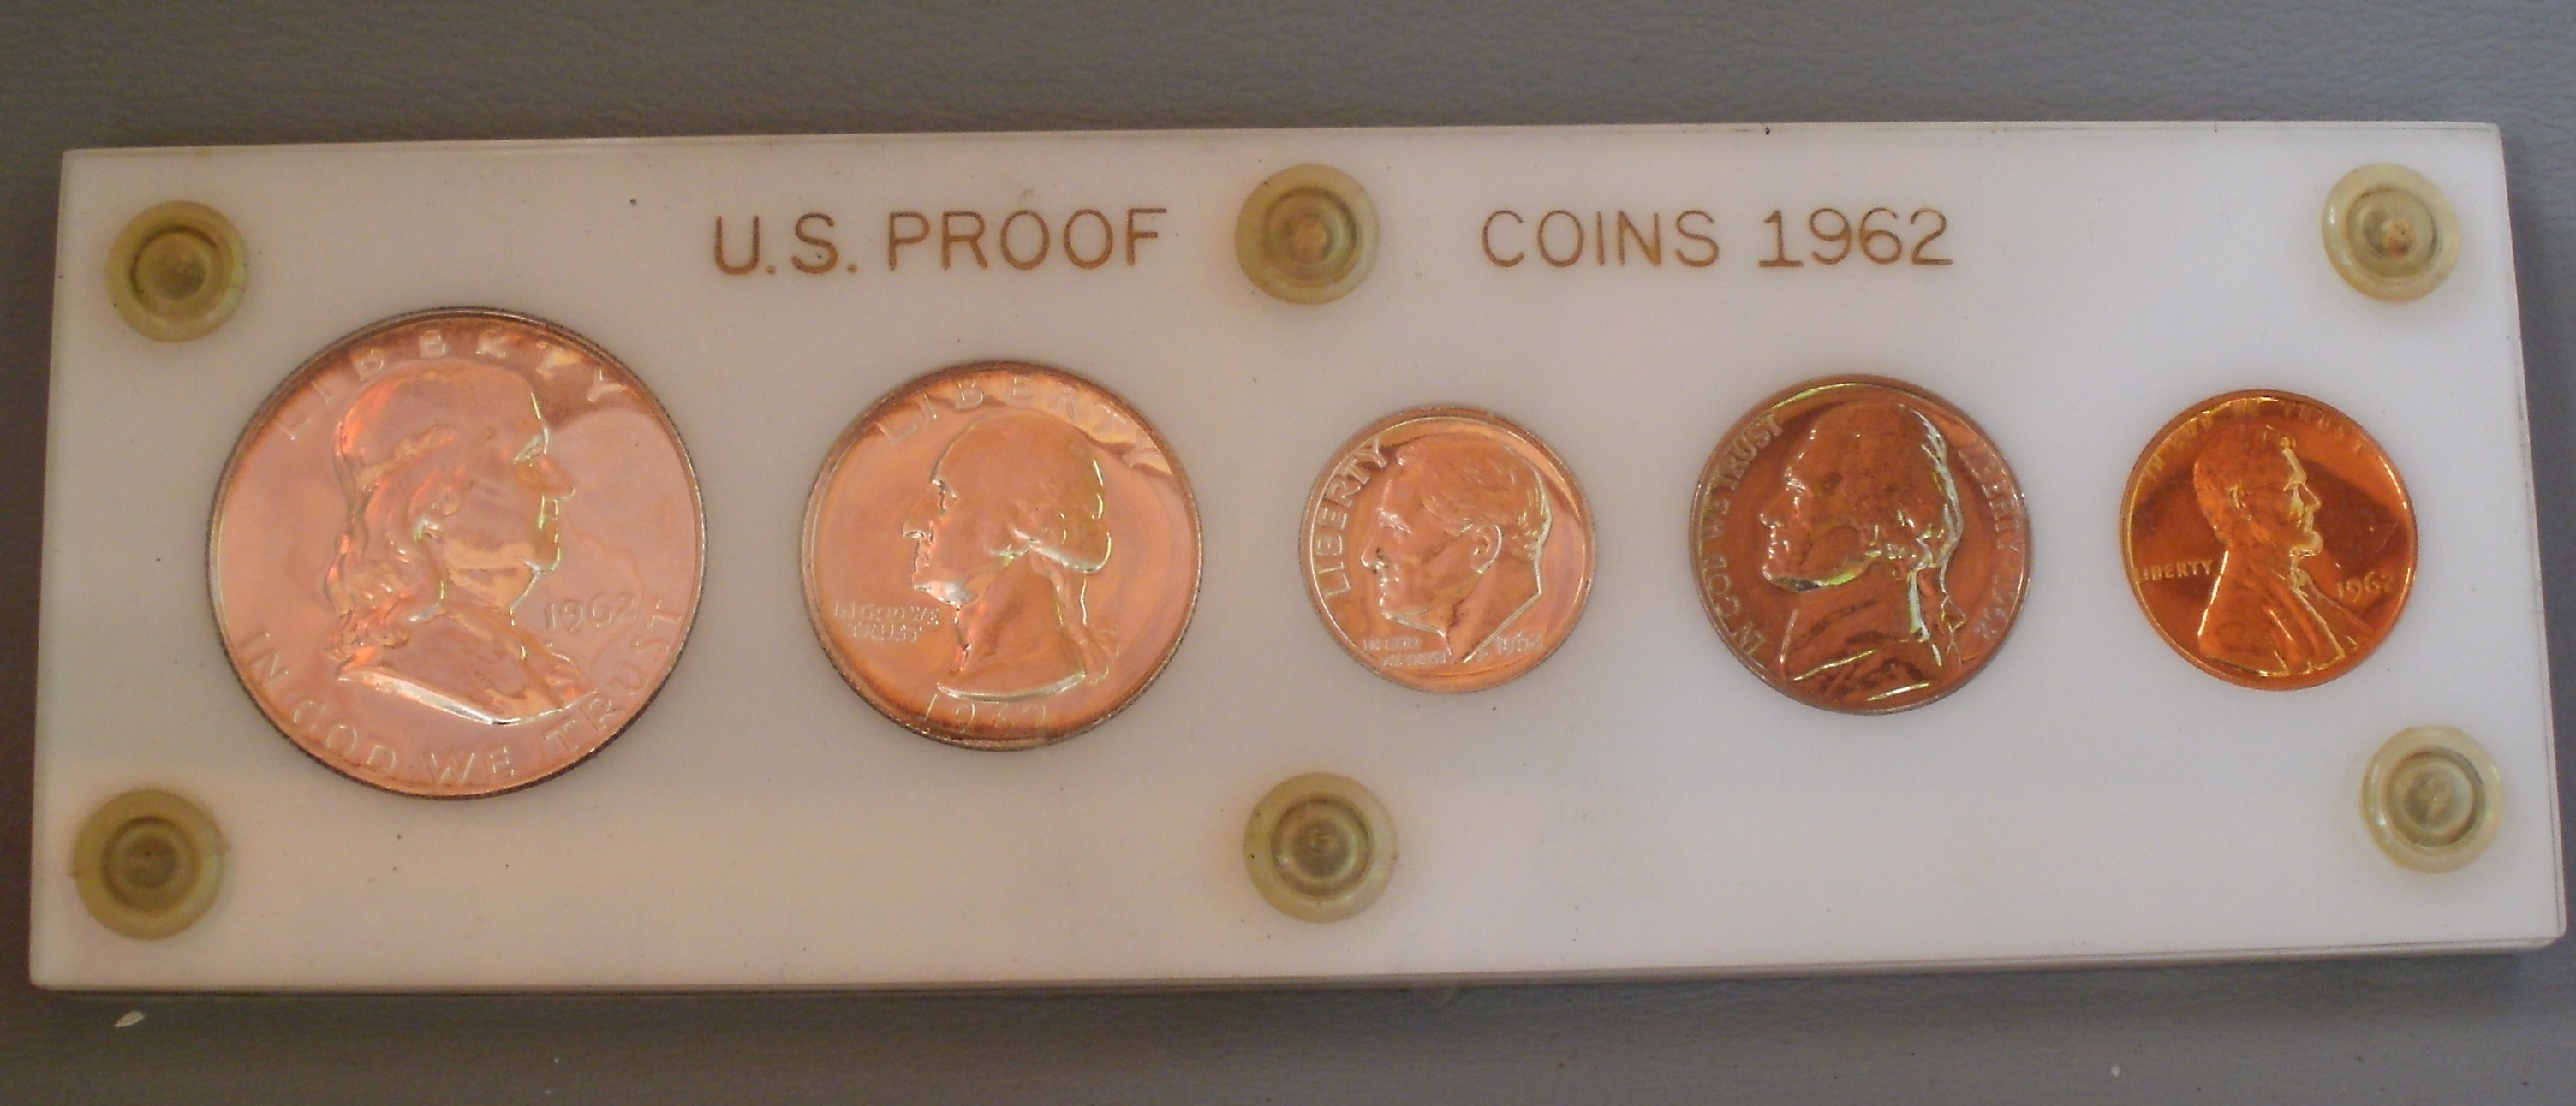 1962 US PROOF COIN SET